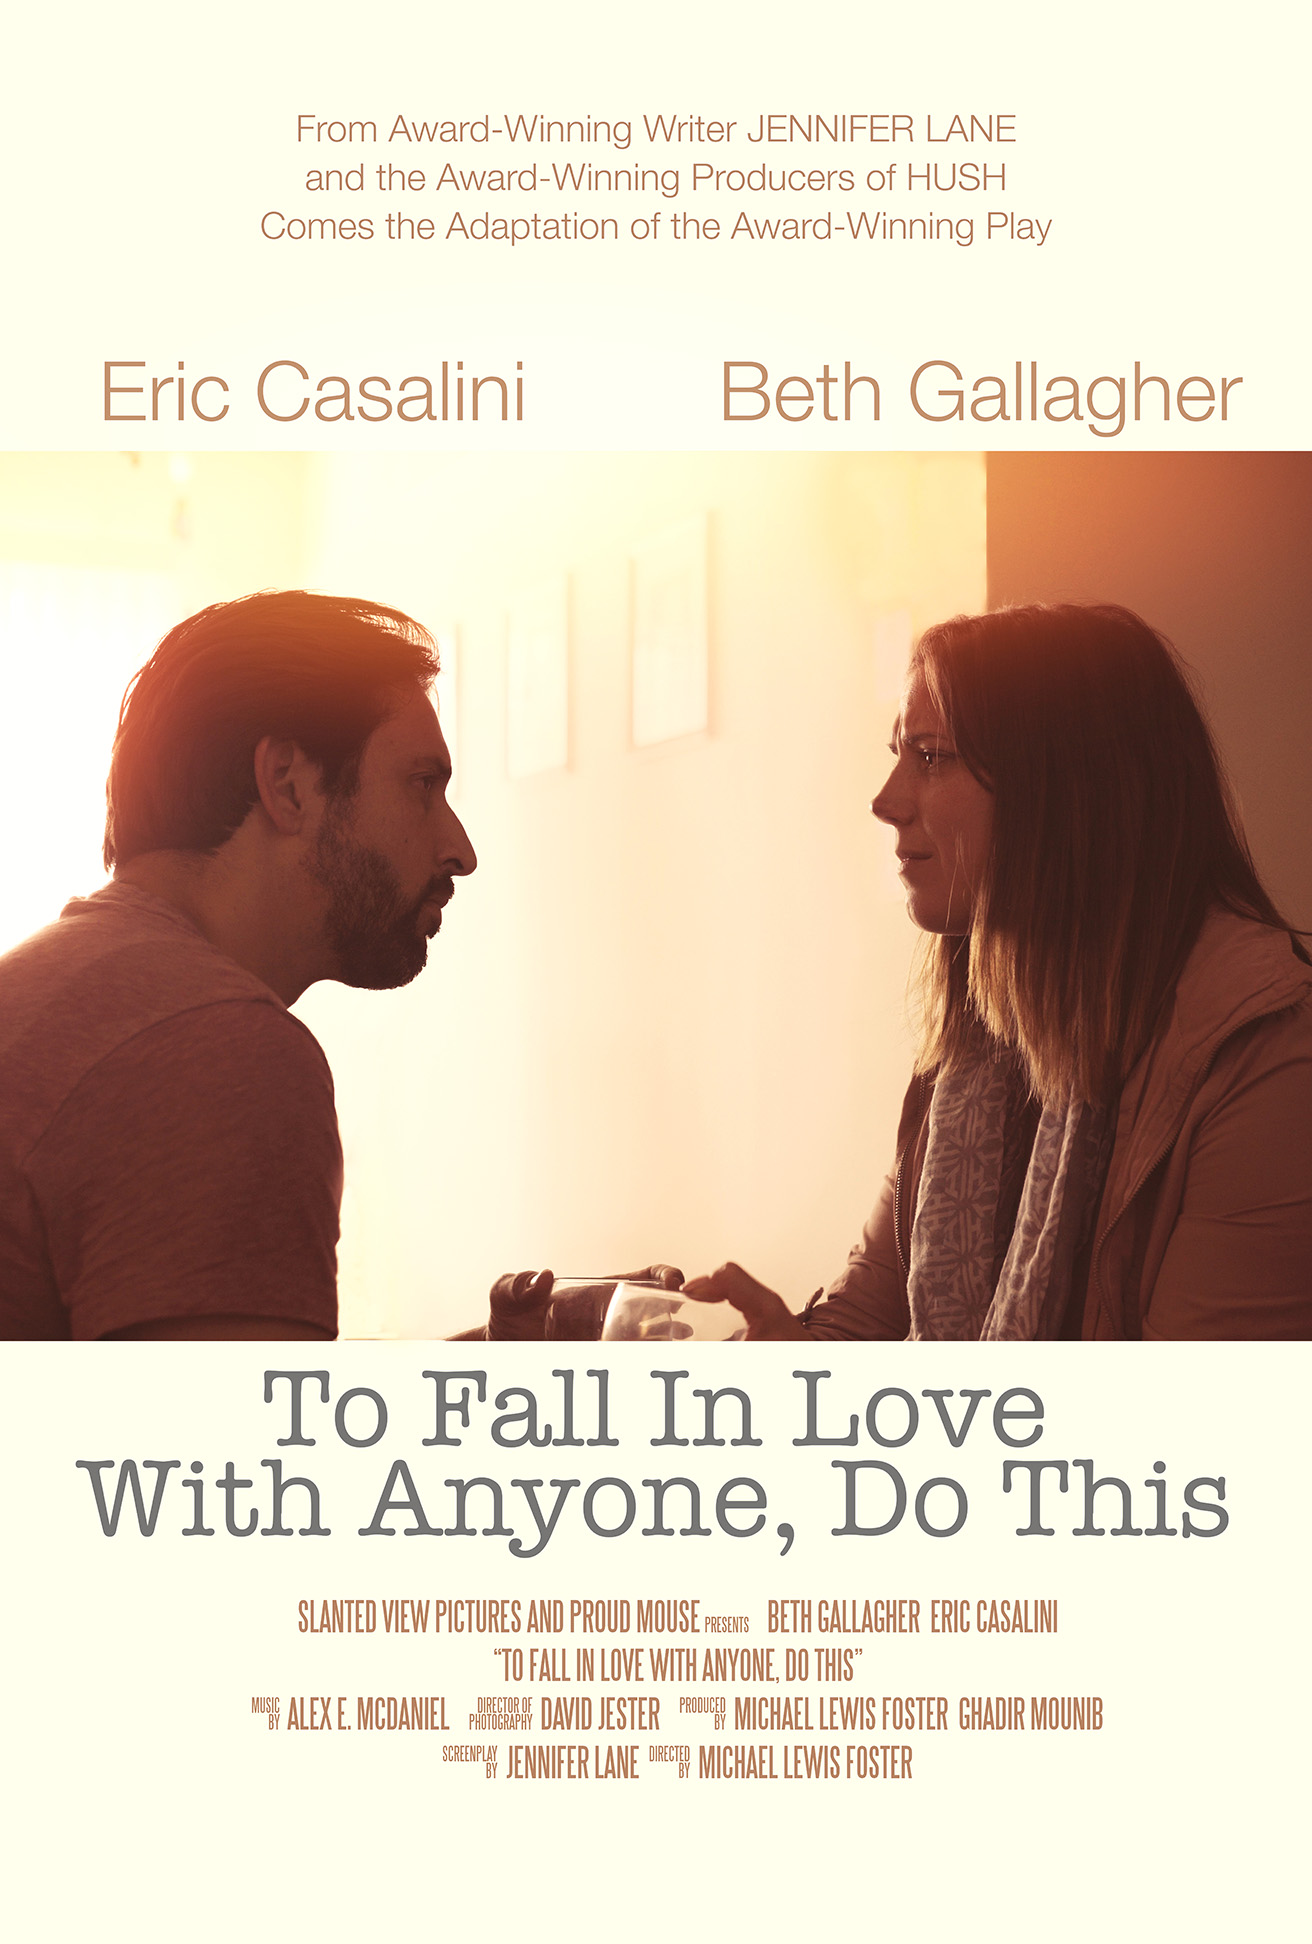 To Fall in Love With Anyone, Do This